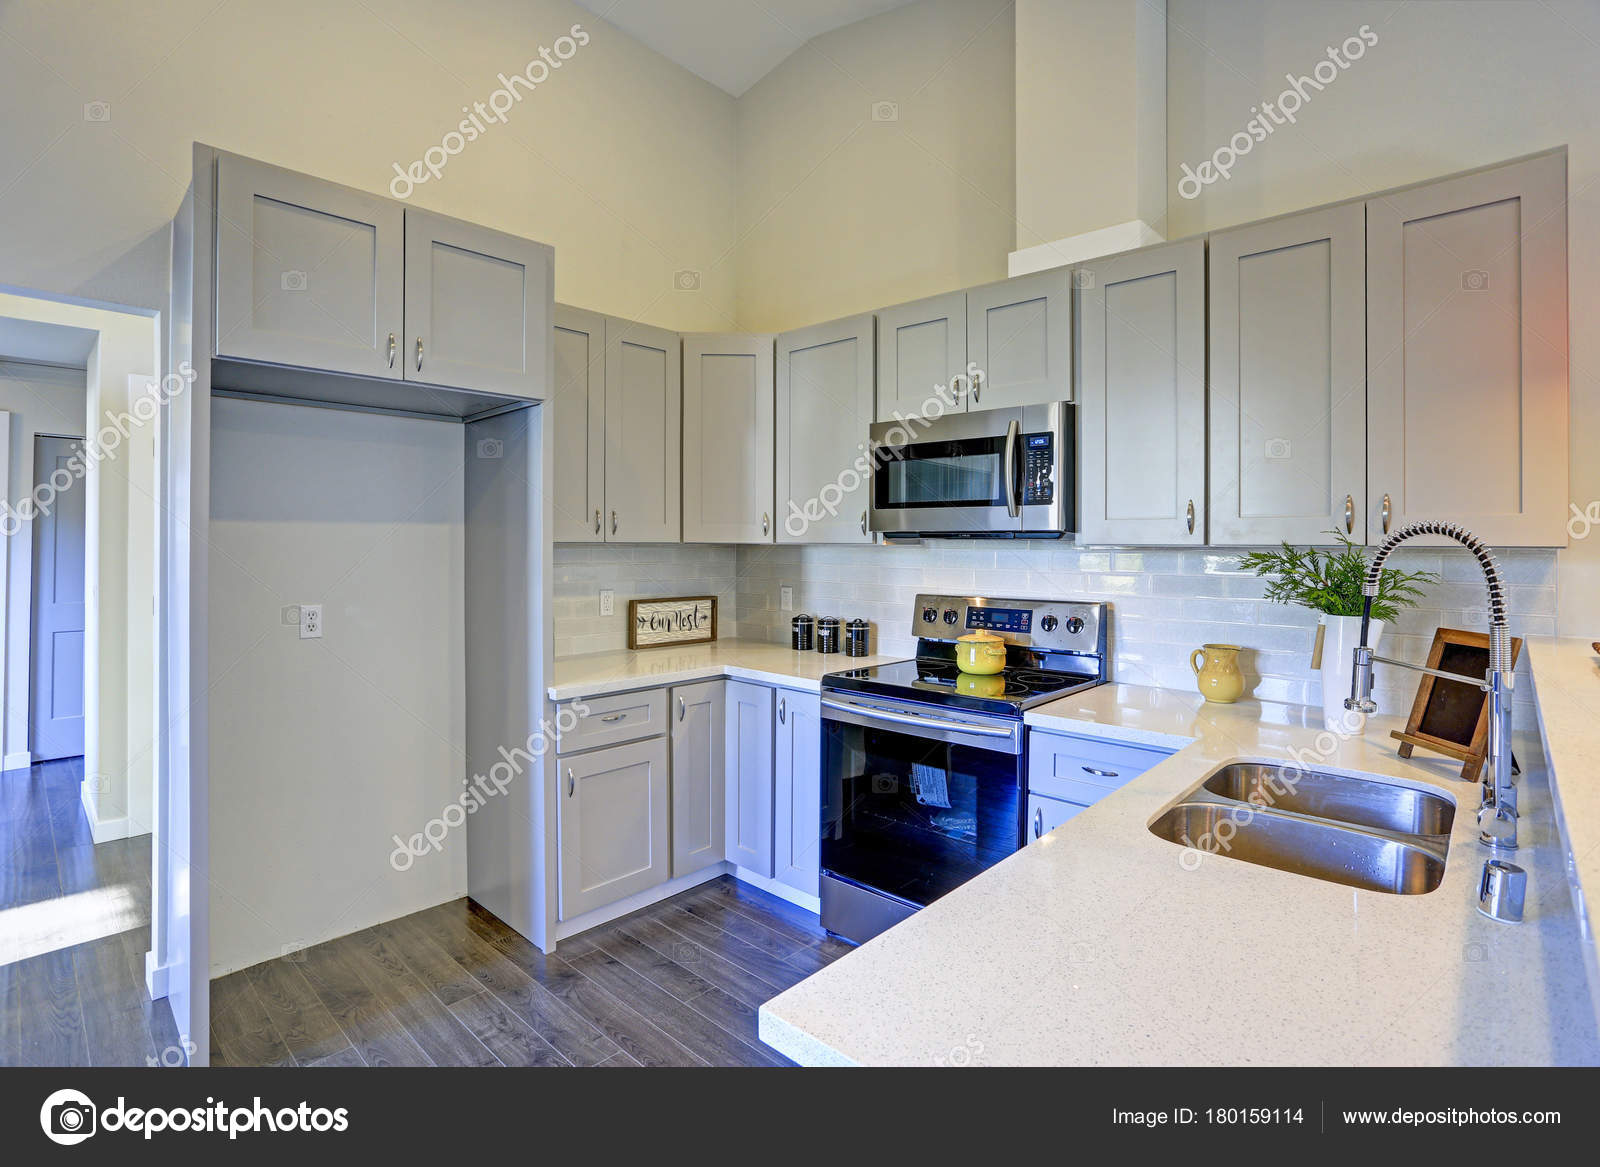 Light Grey Kitchen Room Interior With Vaulted Ceiling Stock